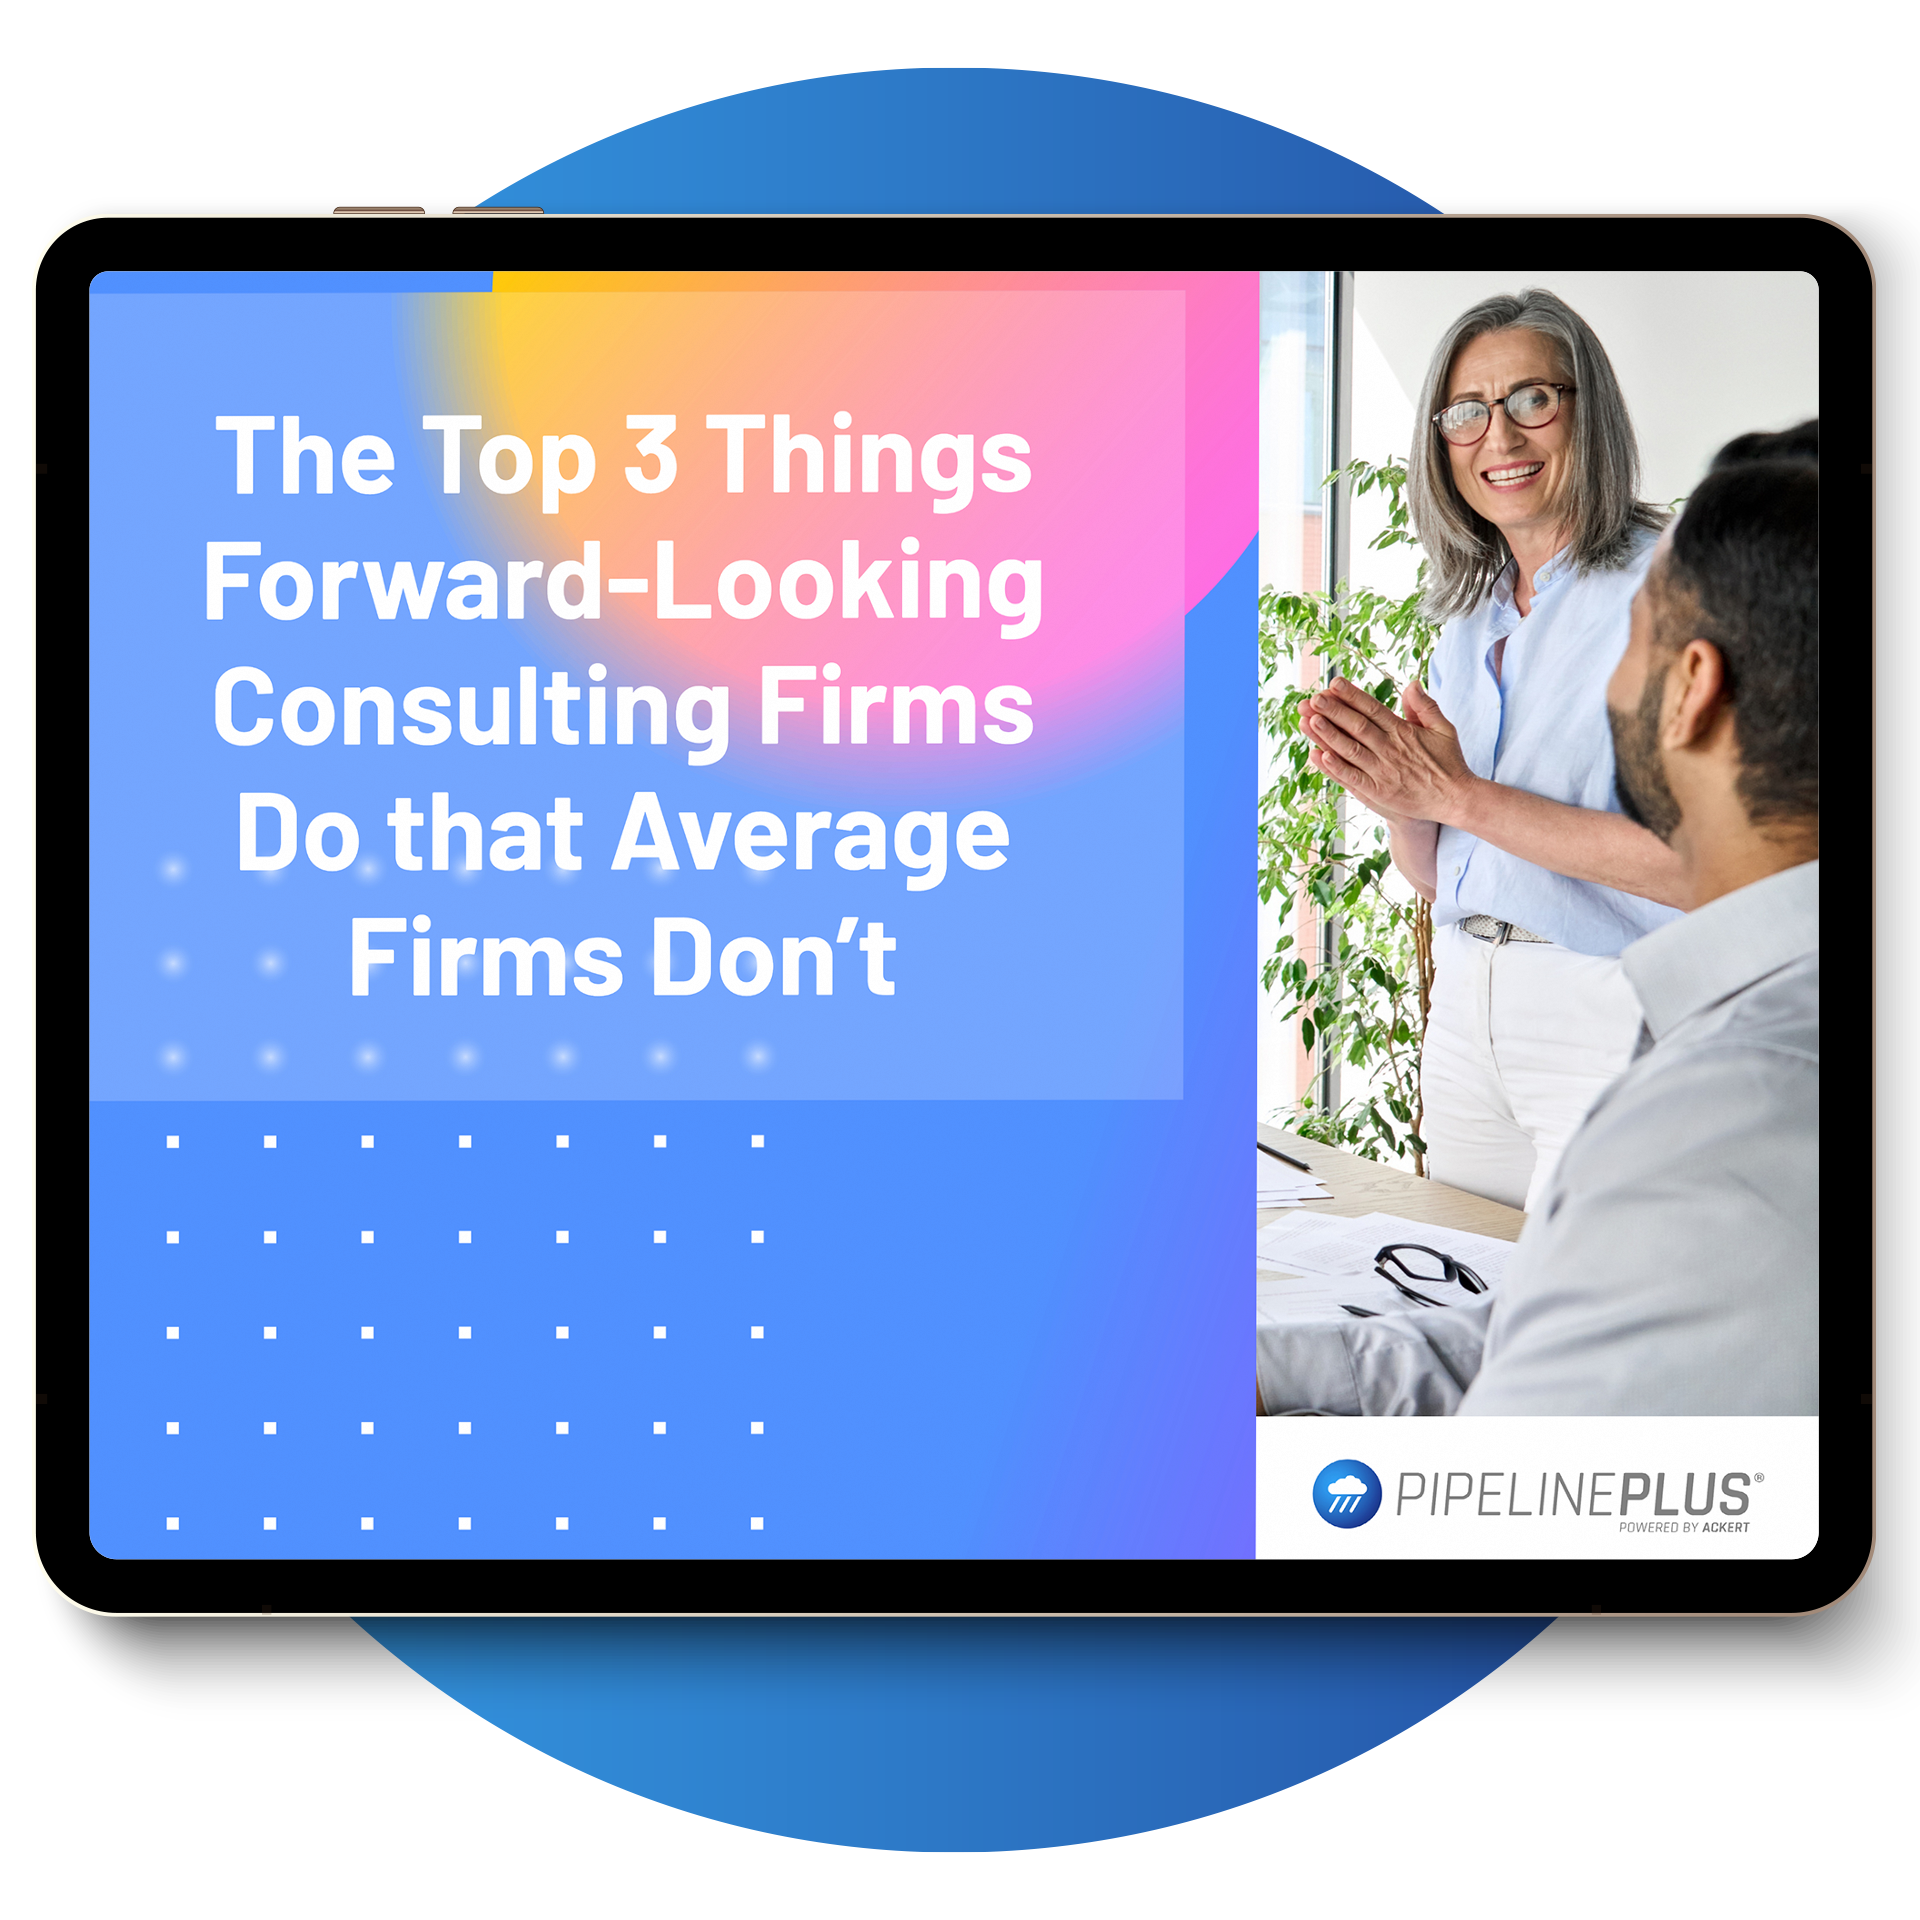 Free Guide Download | The Top 3 Things Forward-Looking Consulting Firms Do that Average Firms Don’t